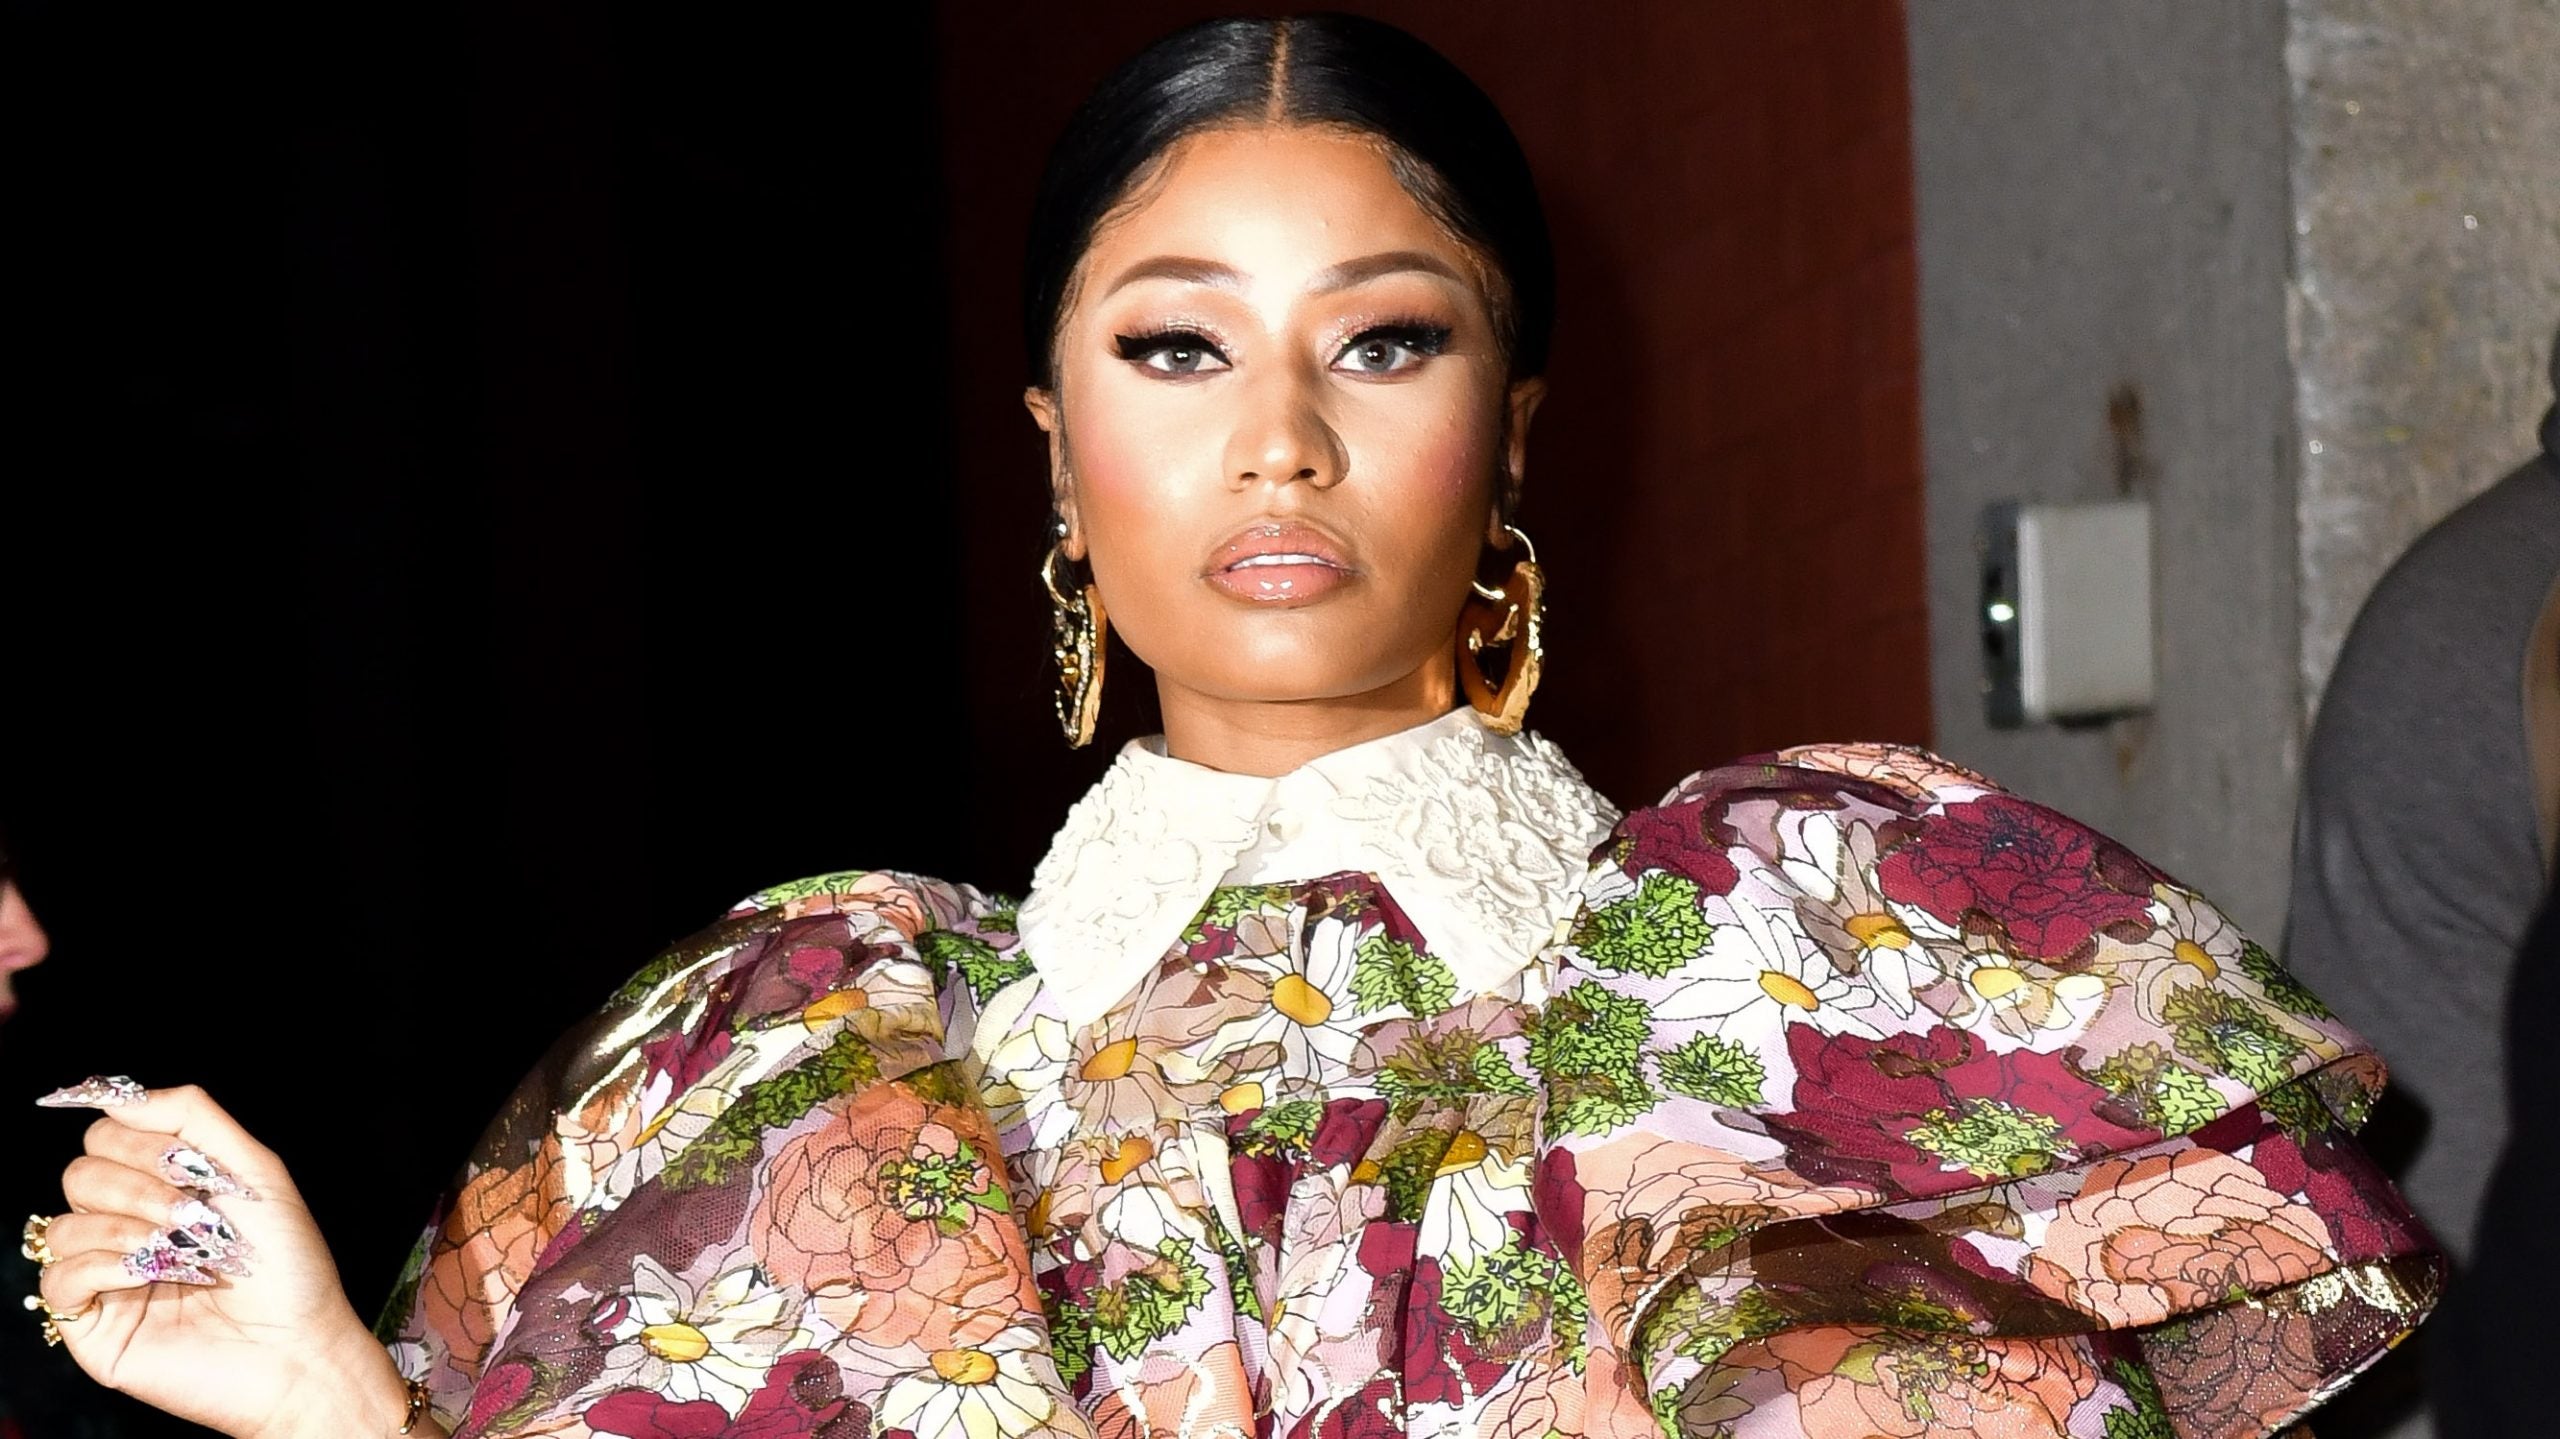 Nicki Minaj Breaks Her Silence About Her Father's Passing